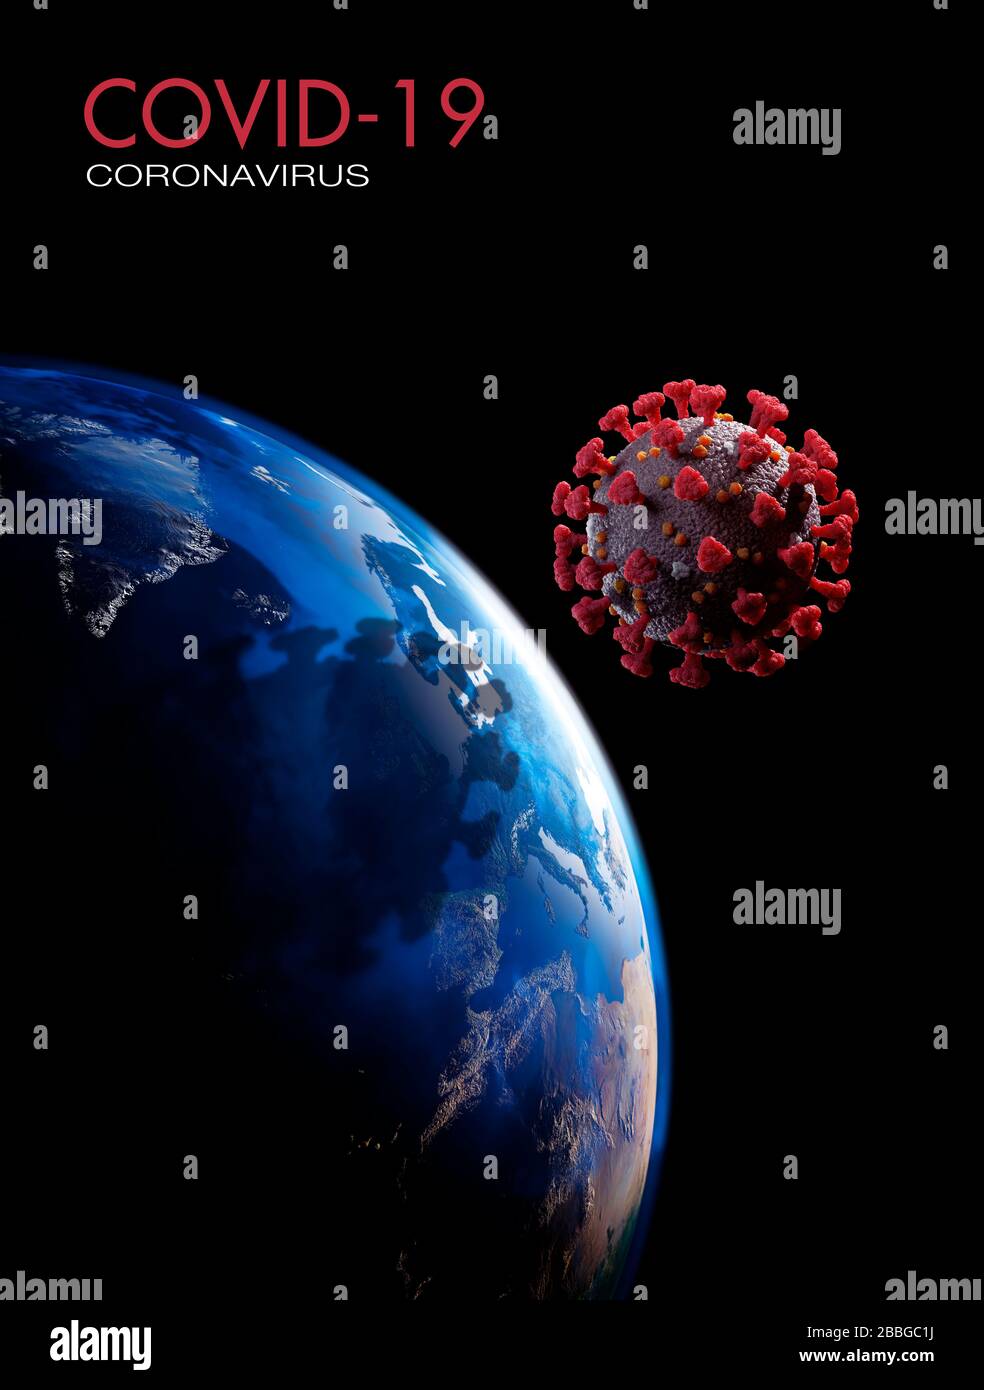 Coronavirus casting dark shadow over the planet Earth, view from space, conceptual 3D illustration with COVID-19 title. Viral epidemic, spreading viru Stock Photo